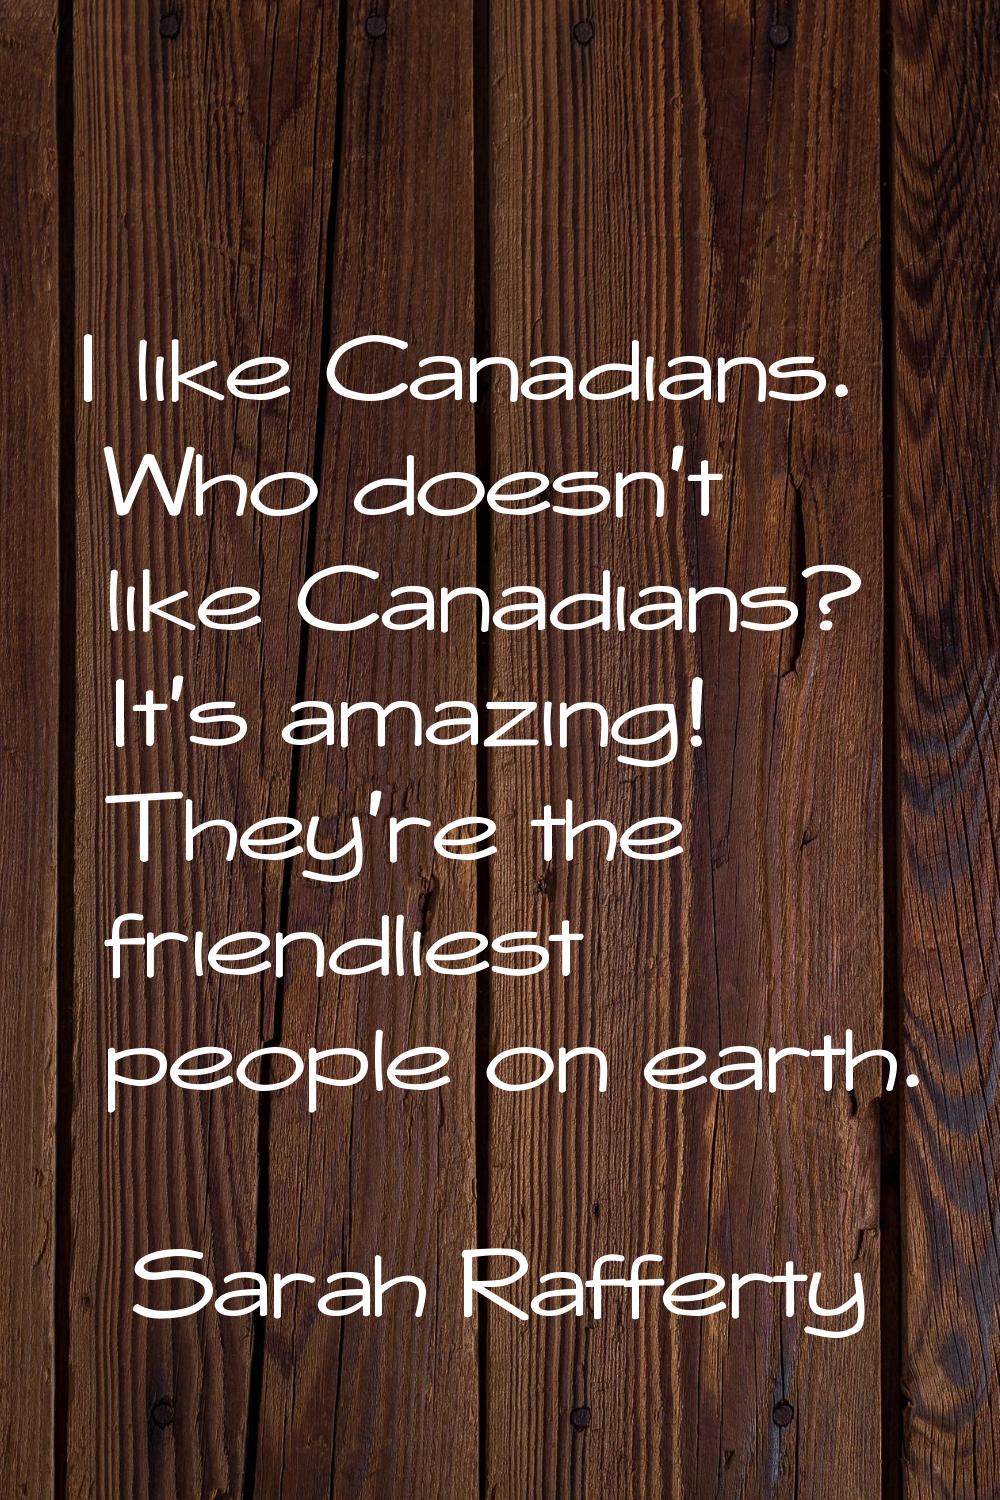 I like Canadians. Who doesn't like Canadians? It's amazing! They're the friendliest people on earth